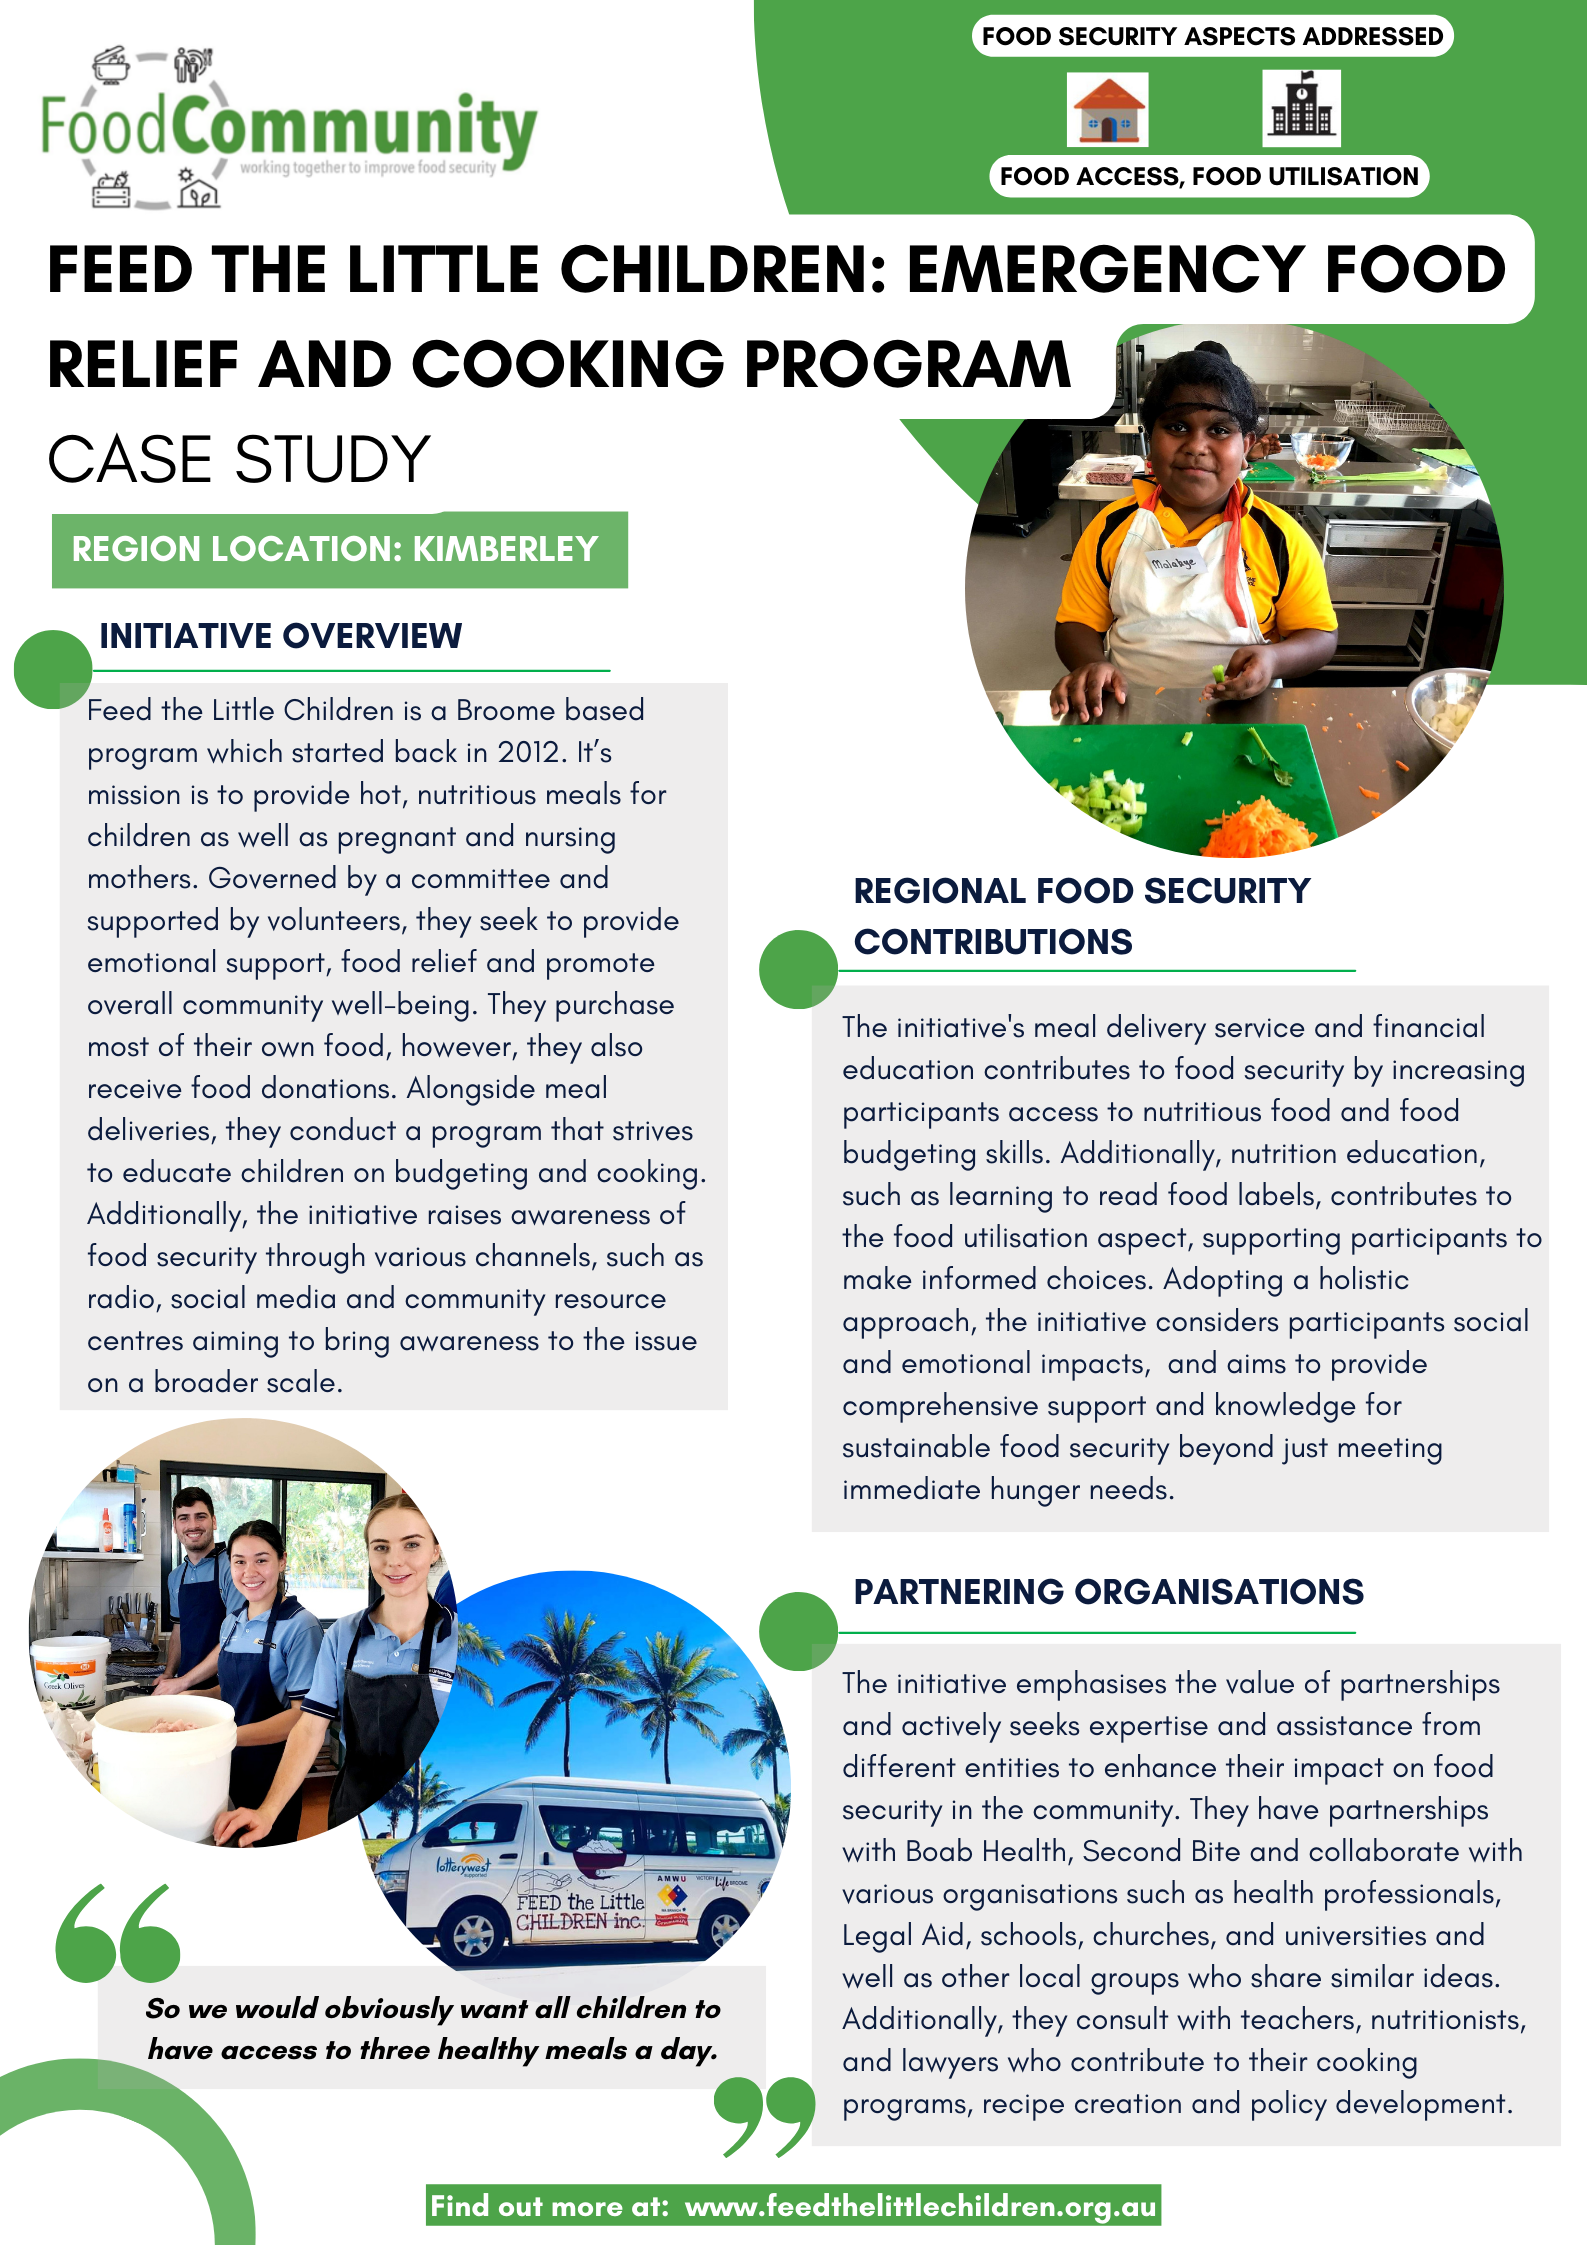 Feed the Little Children: Emergency Food Relief and Cooking Program